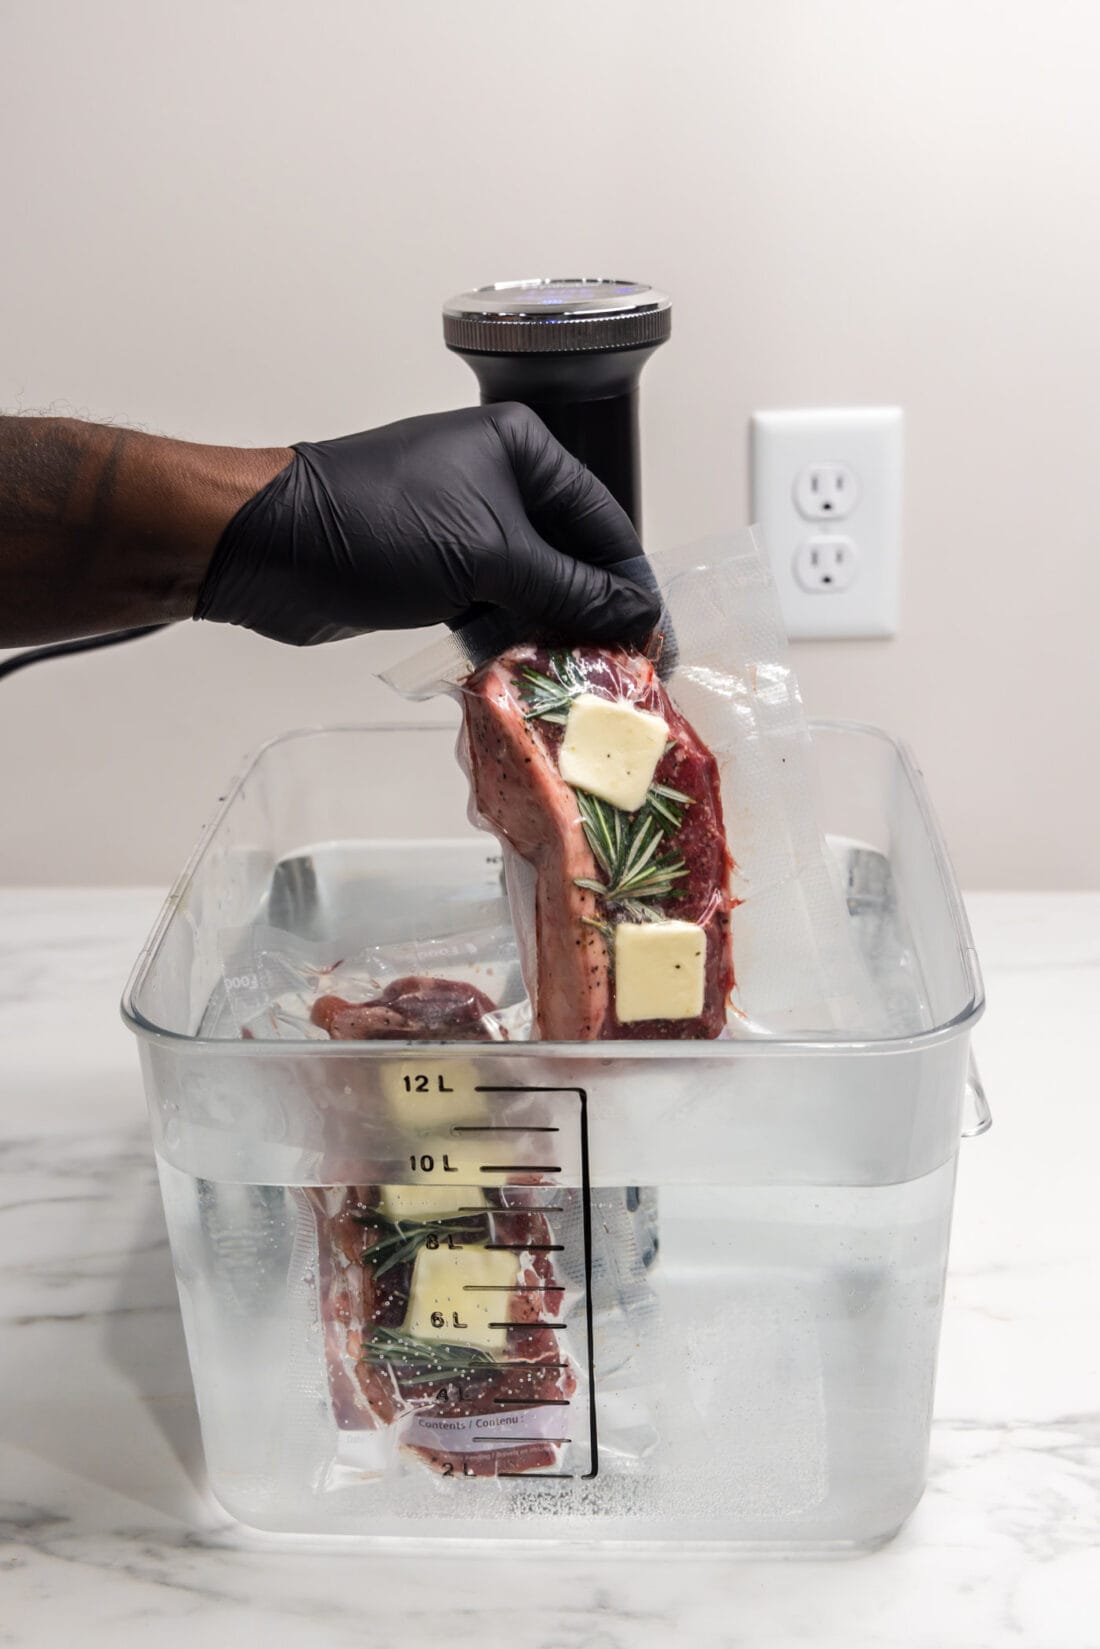 Sous Vide Steak being dropped into the Sous Vide container